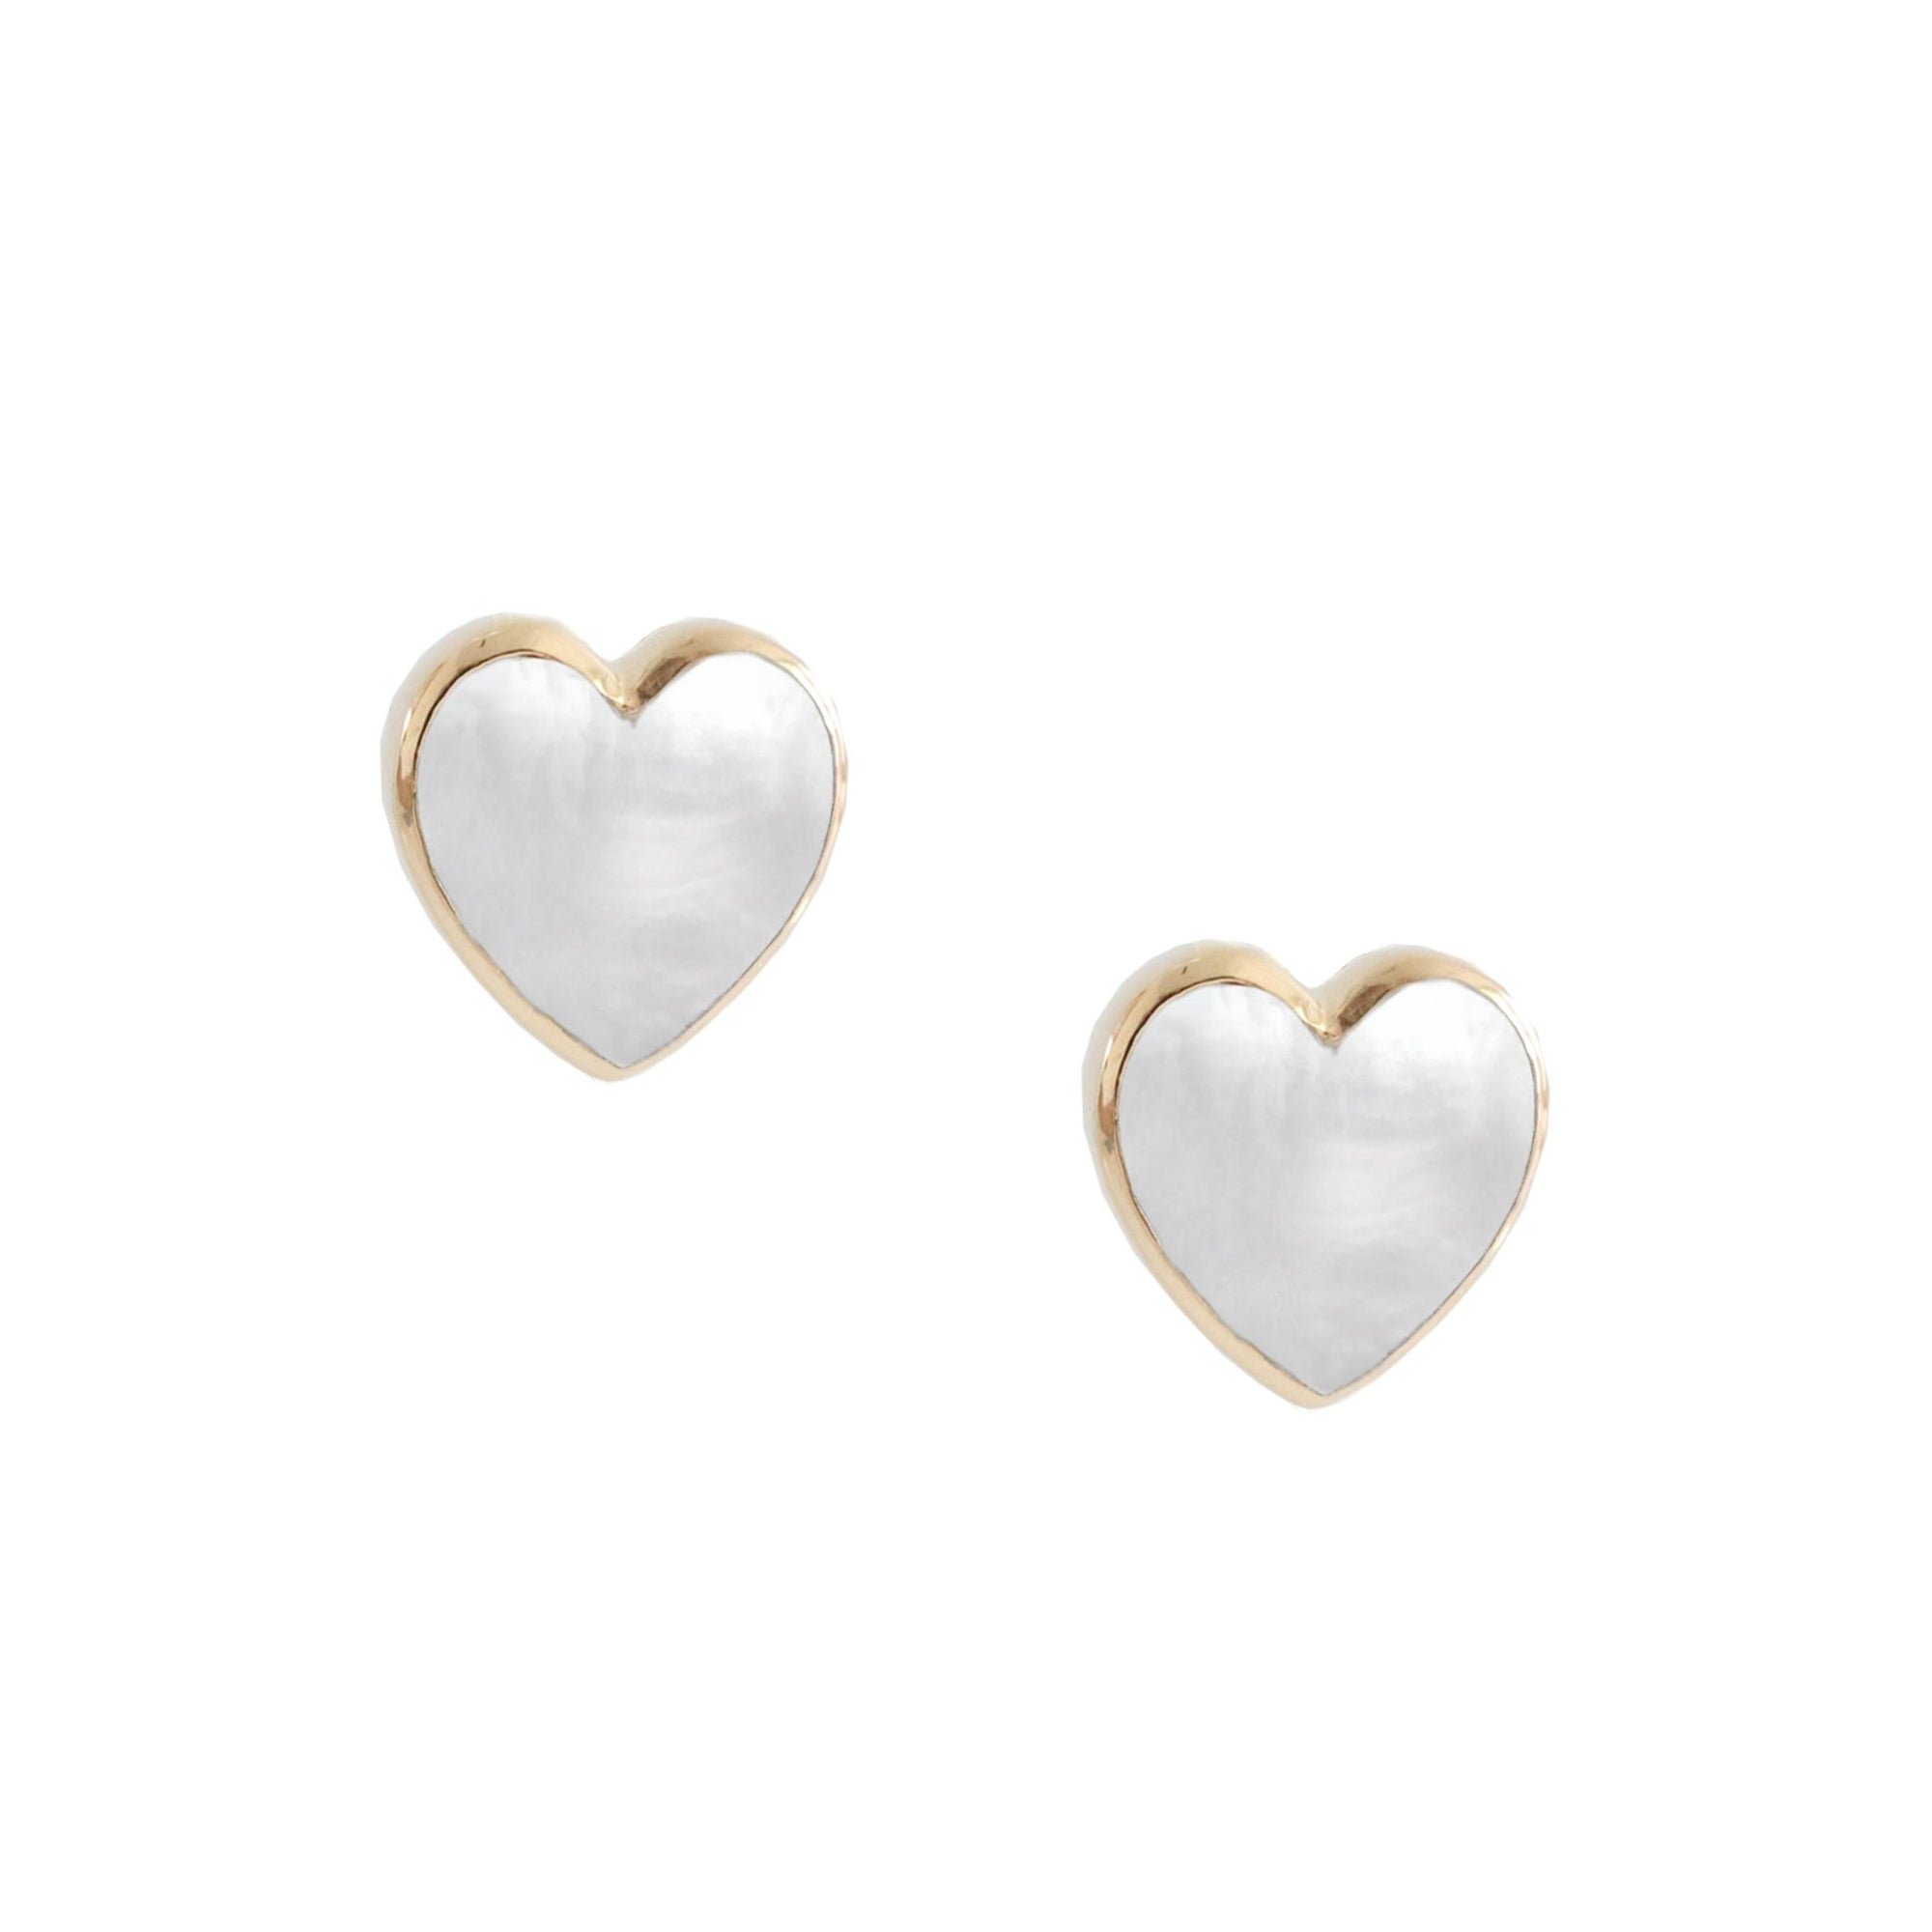 FRAICHE INSPIRE SWEETHEART STUDS - MOTHER OF PEARL & GOLD - SO PRETTY CARA COTTER